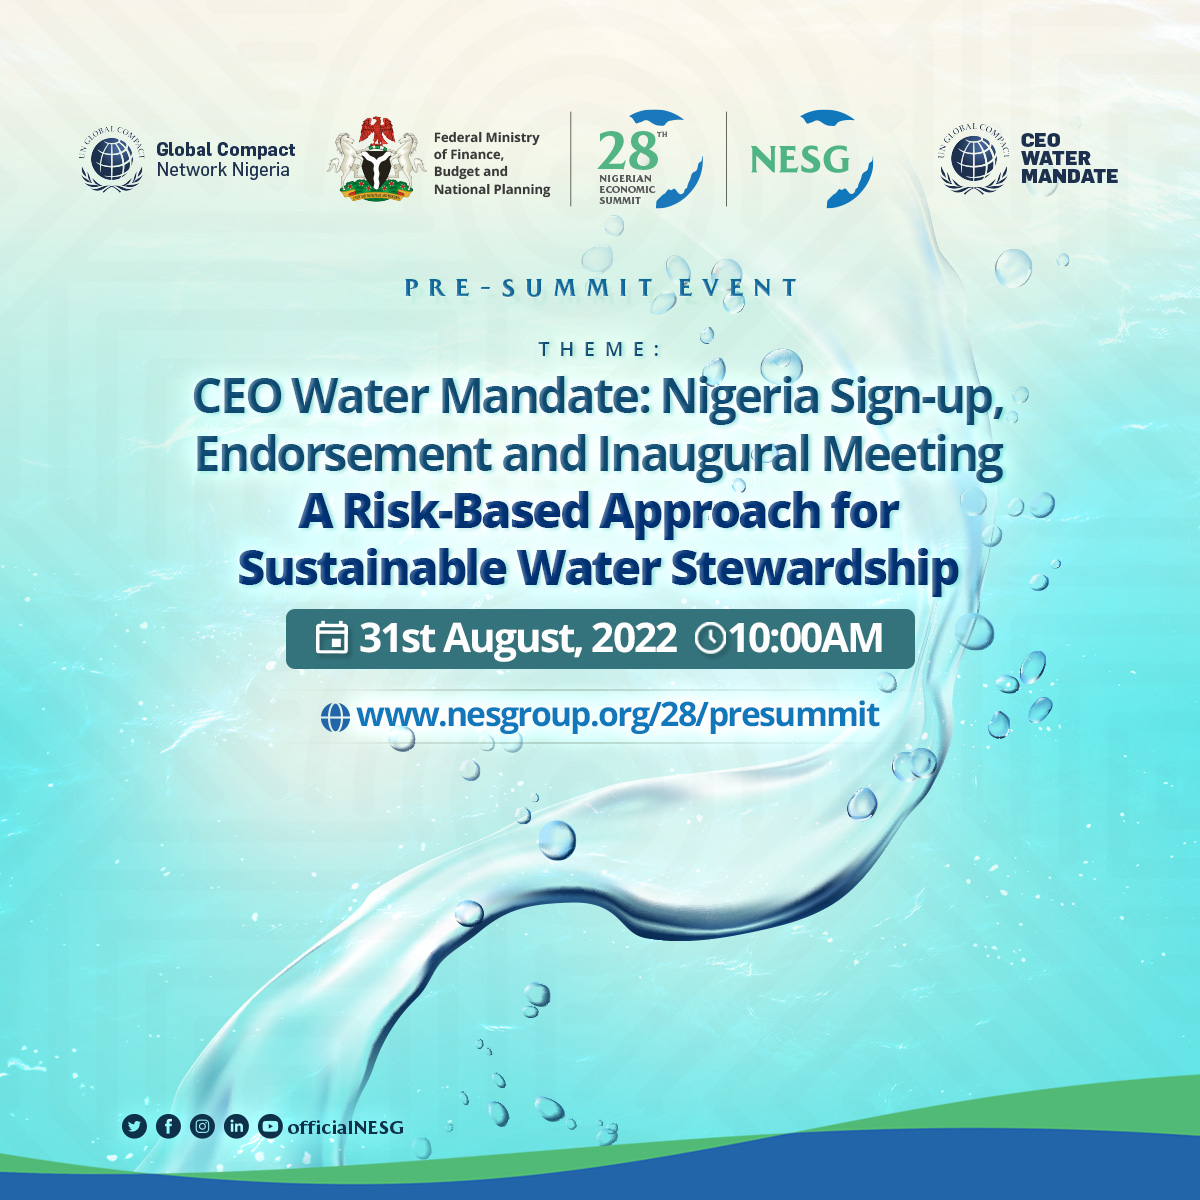 NESG, UNGC hold CEO Water Mandate Inaugural Meeting